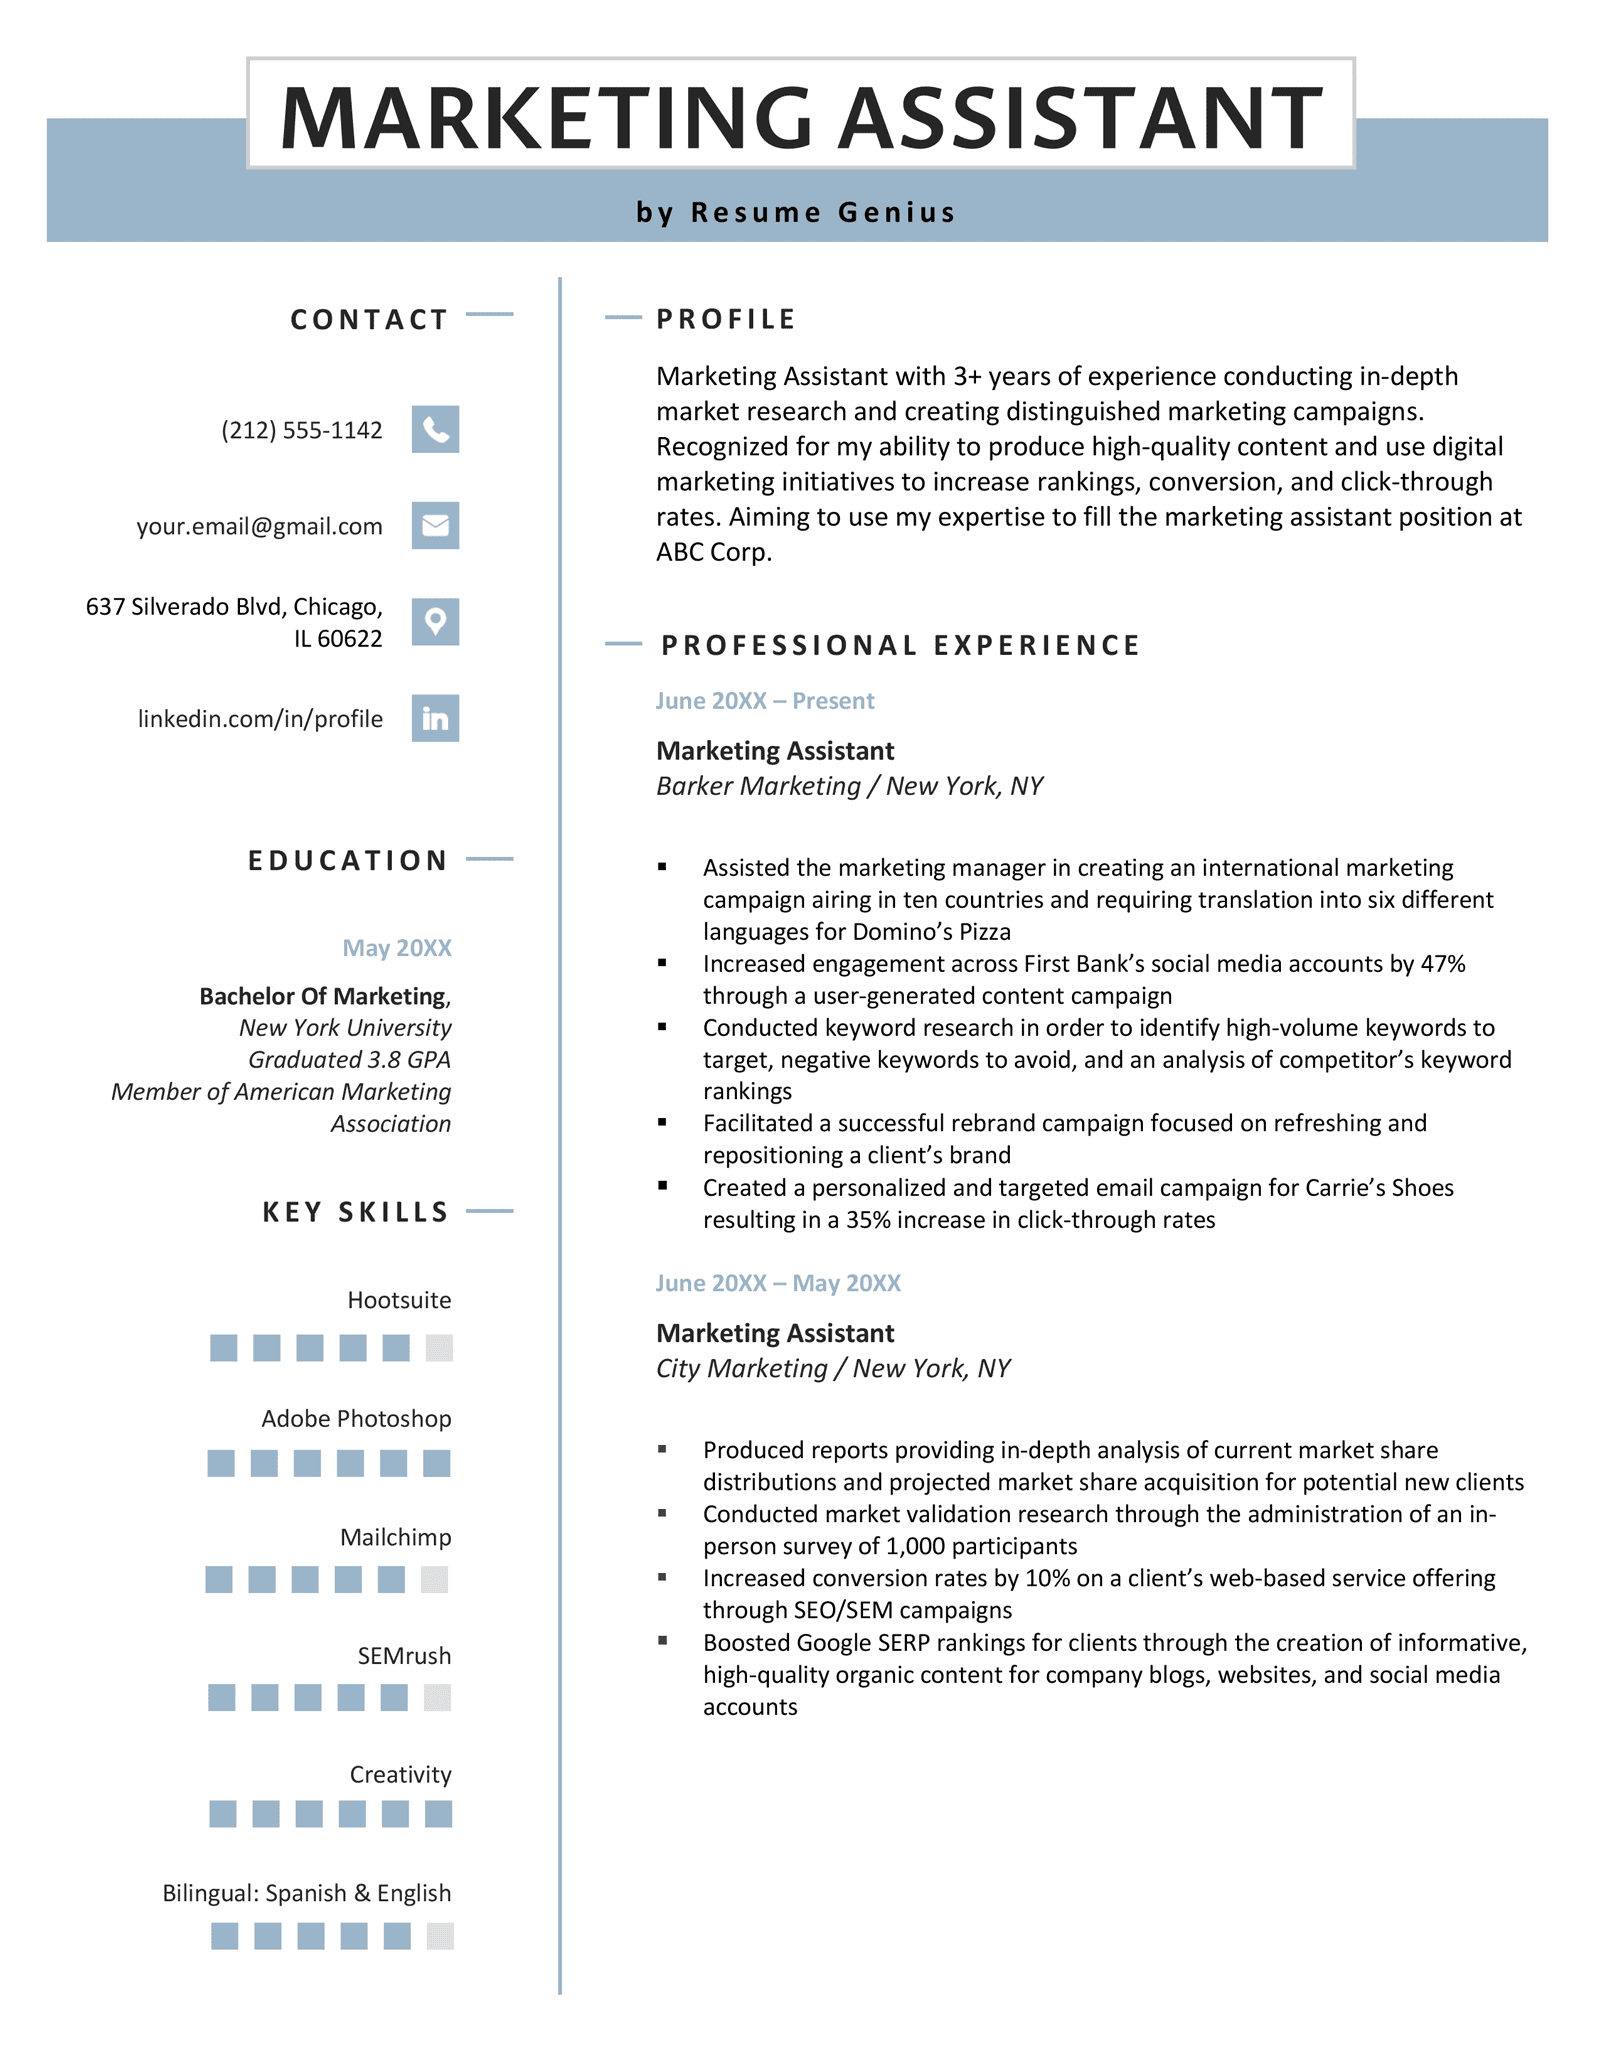 An example of a marketing assistant resume